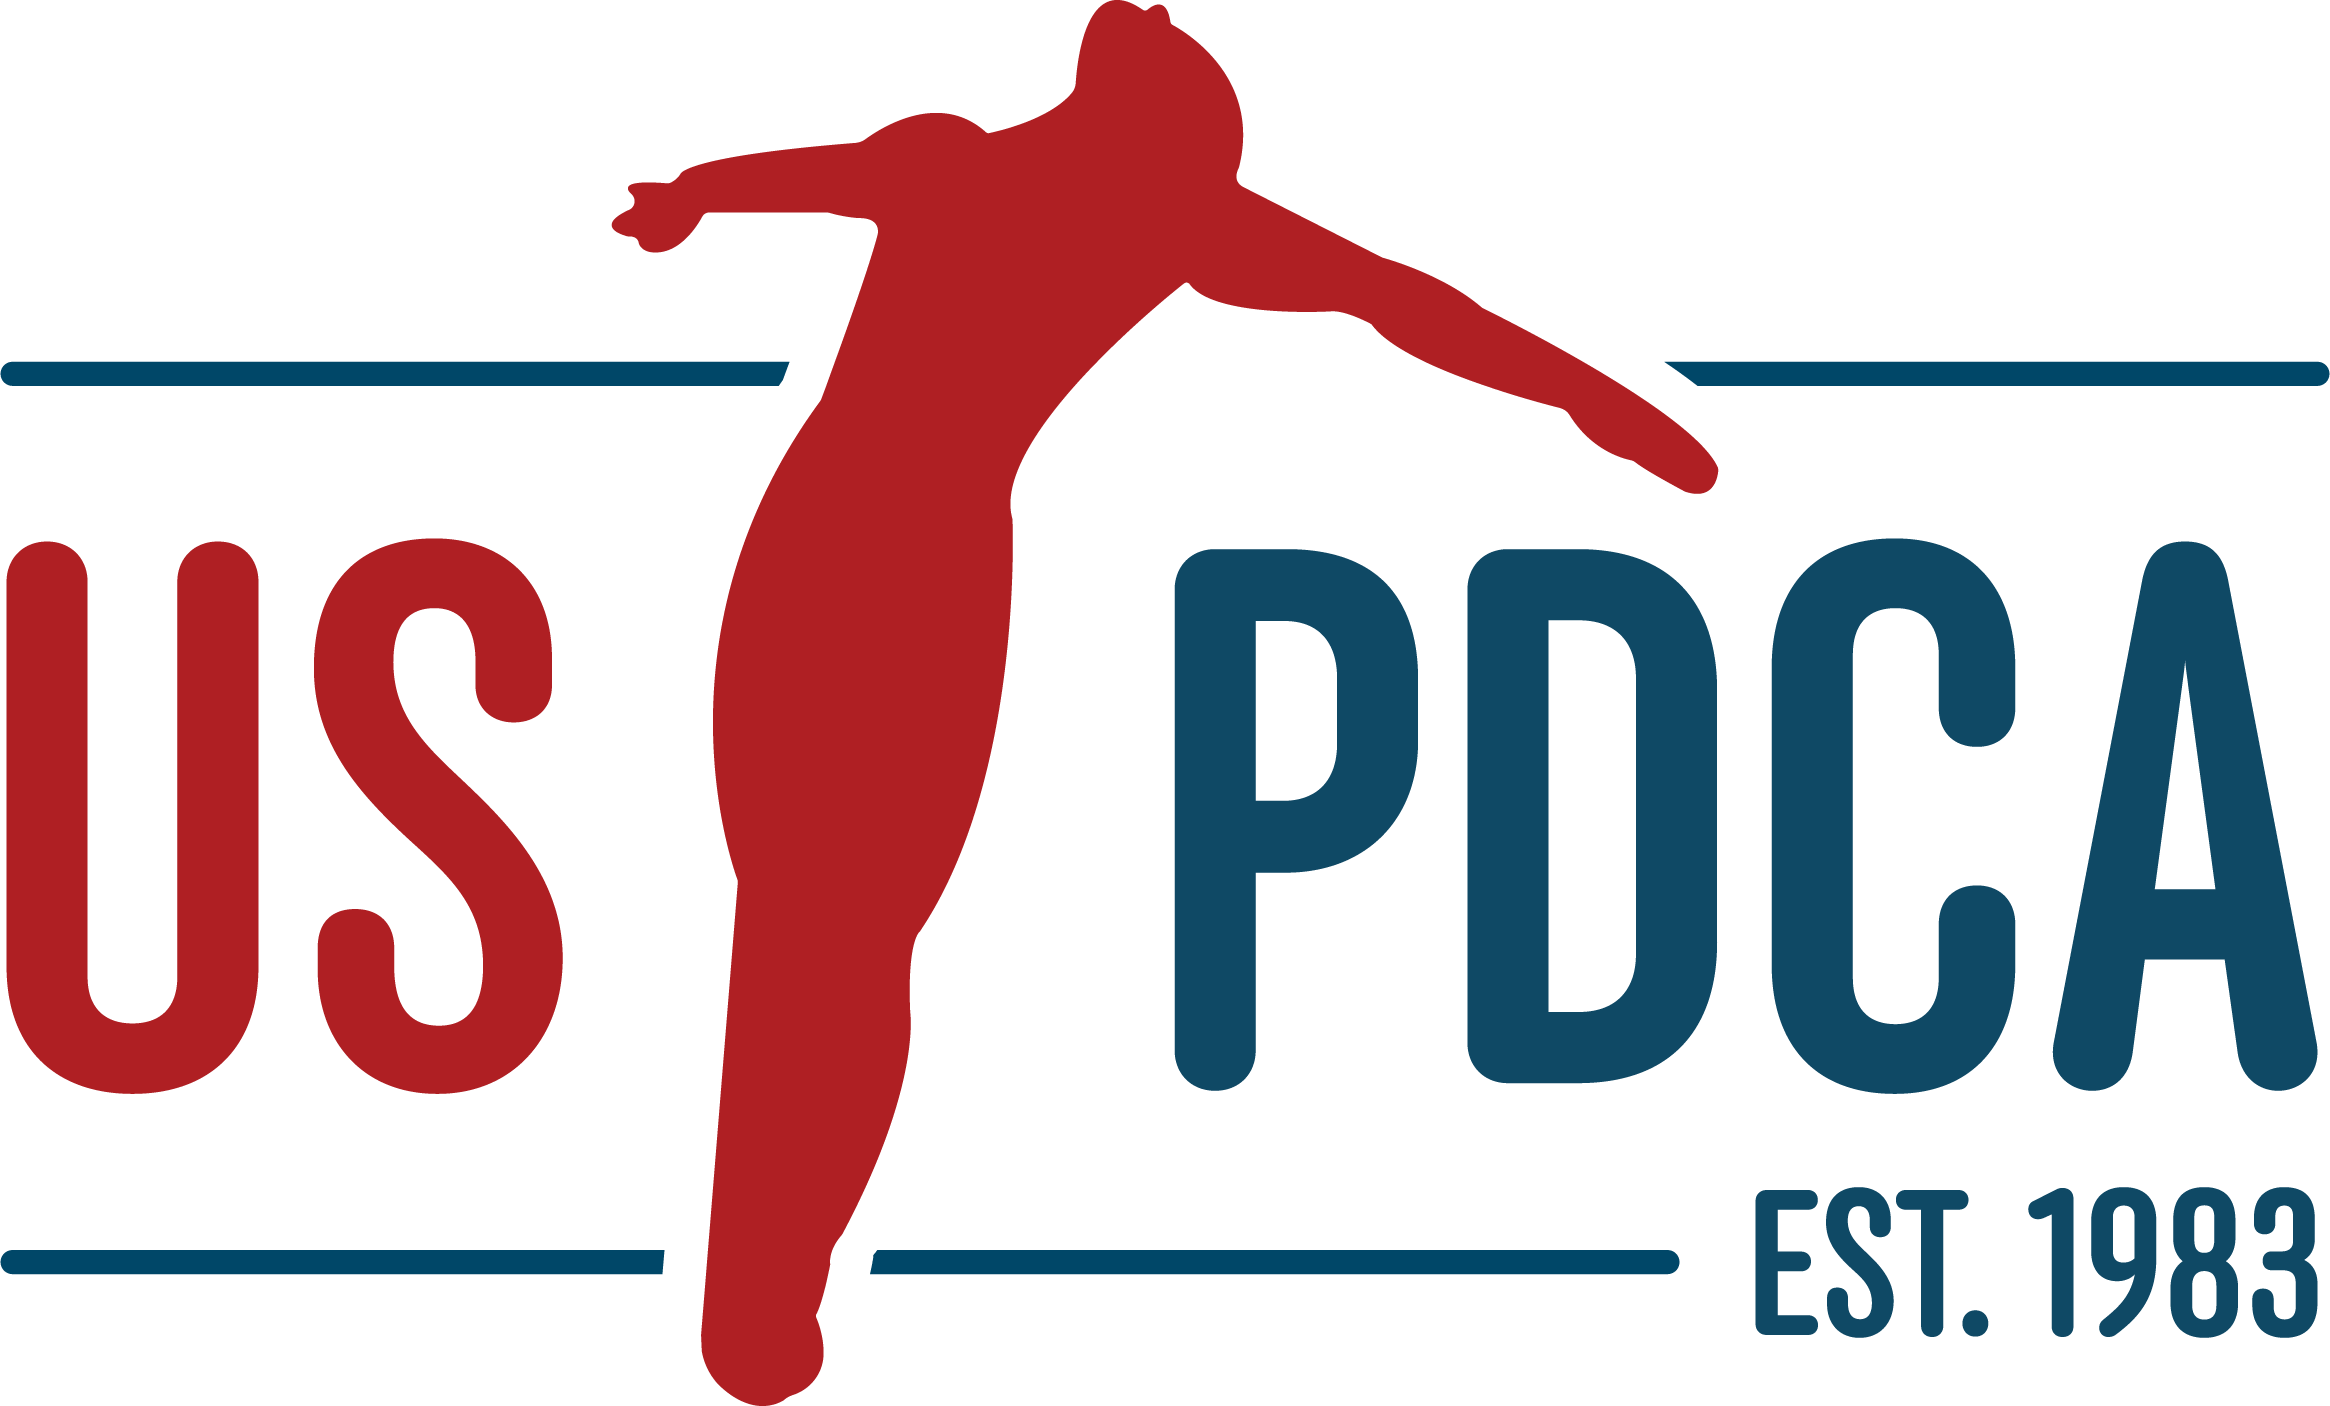 The US Professional Diving Coaches Association